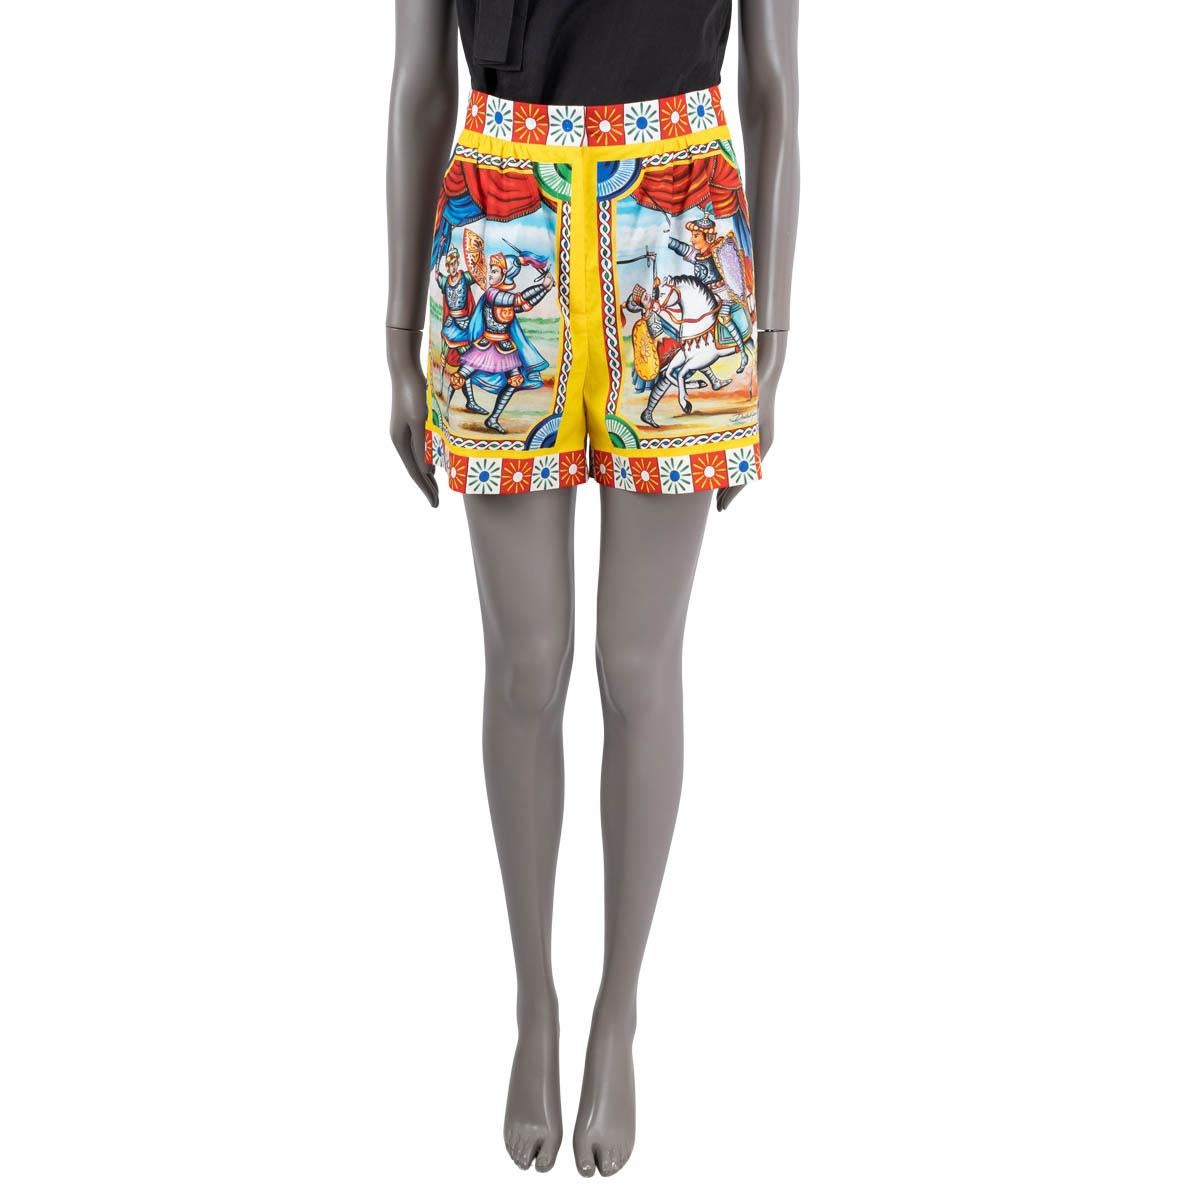 100% authentic Dolce & Gabbana high waisted shorts in carretto print cotton (100%). Feature two slit pockets. Open with push-button and a zipper on the front. Have been worn and are in excellent condition.

2021 Spring/Summer

Measurements
Tag